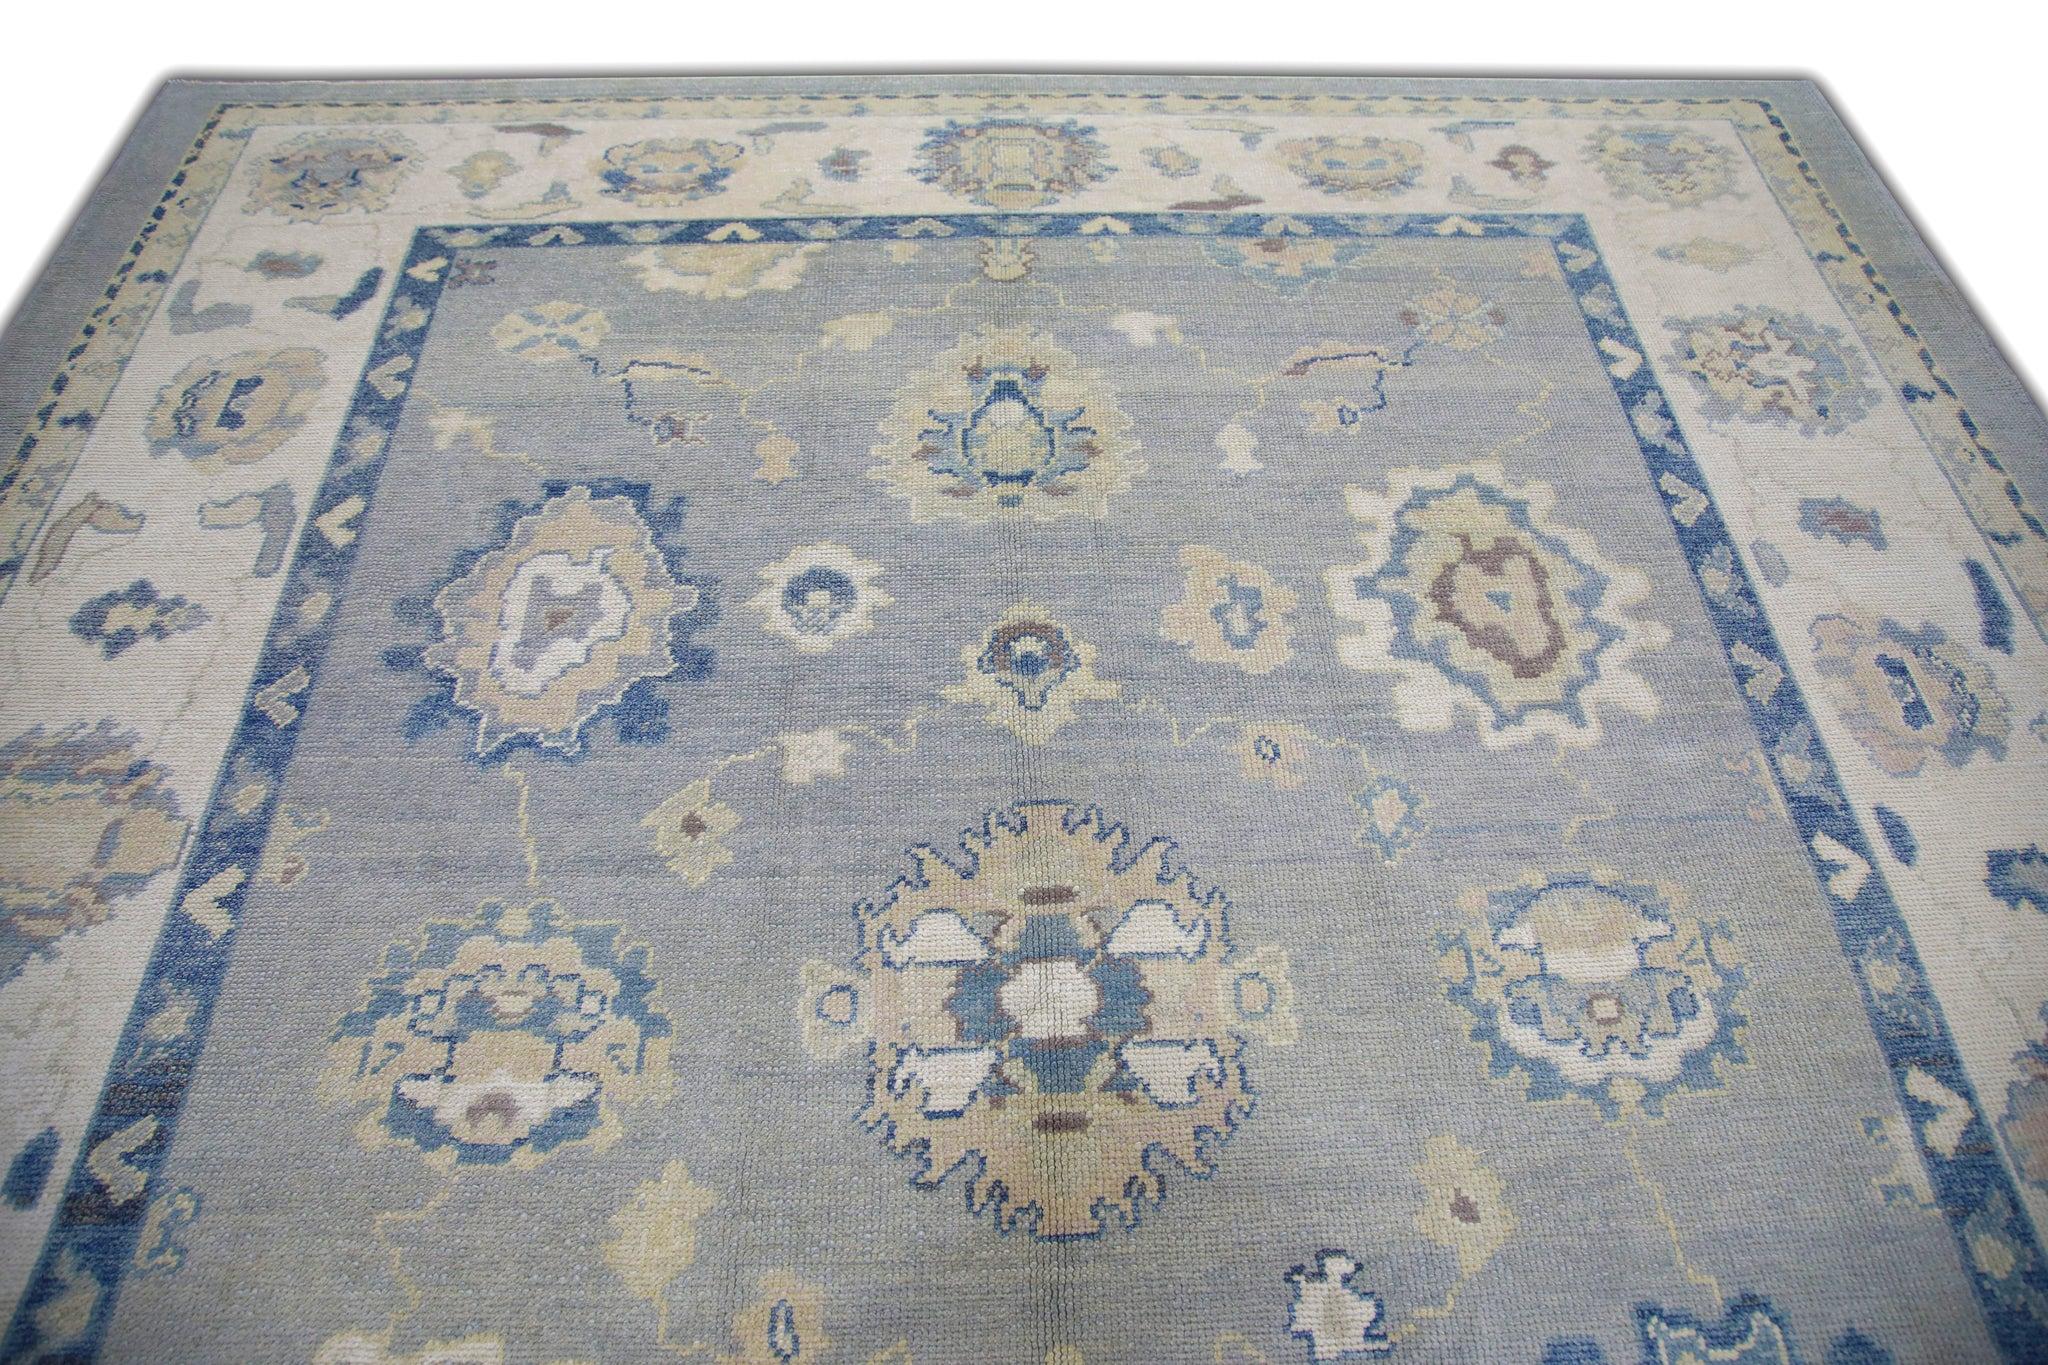 Handwoven Wool Floral Turkish Oushak Rug in Shades of Blue 9' x 10'6